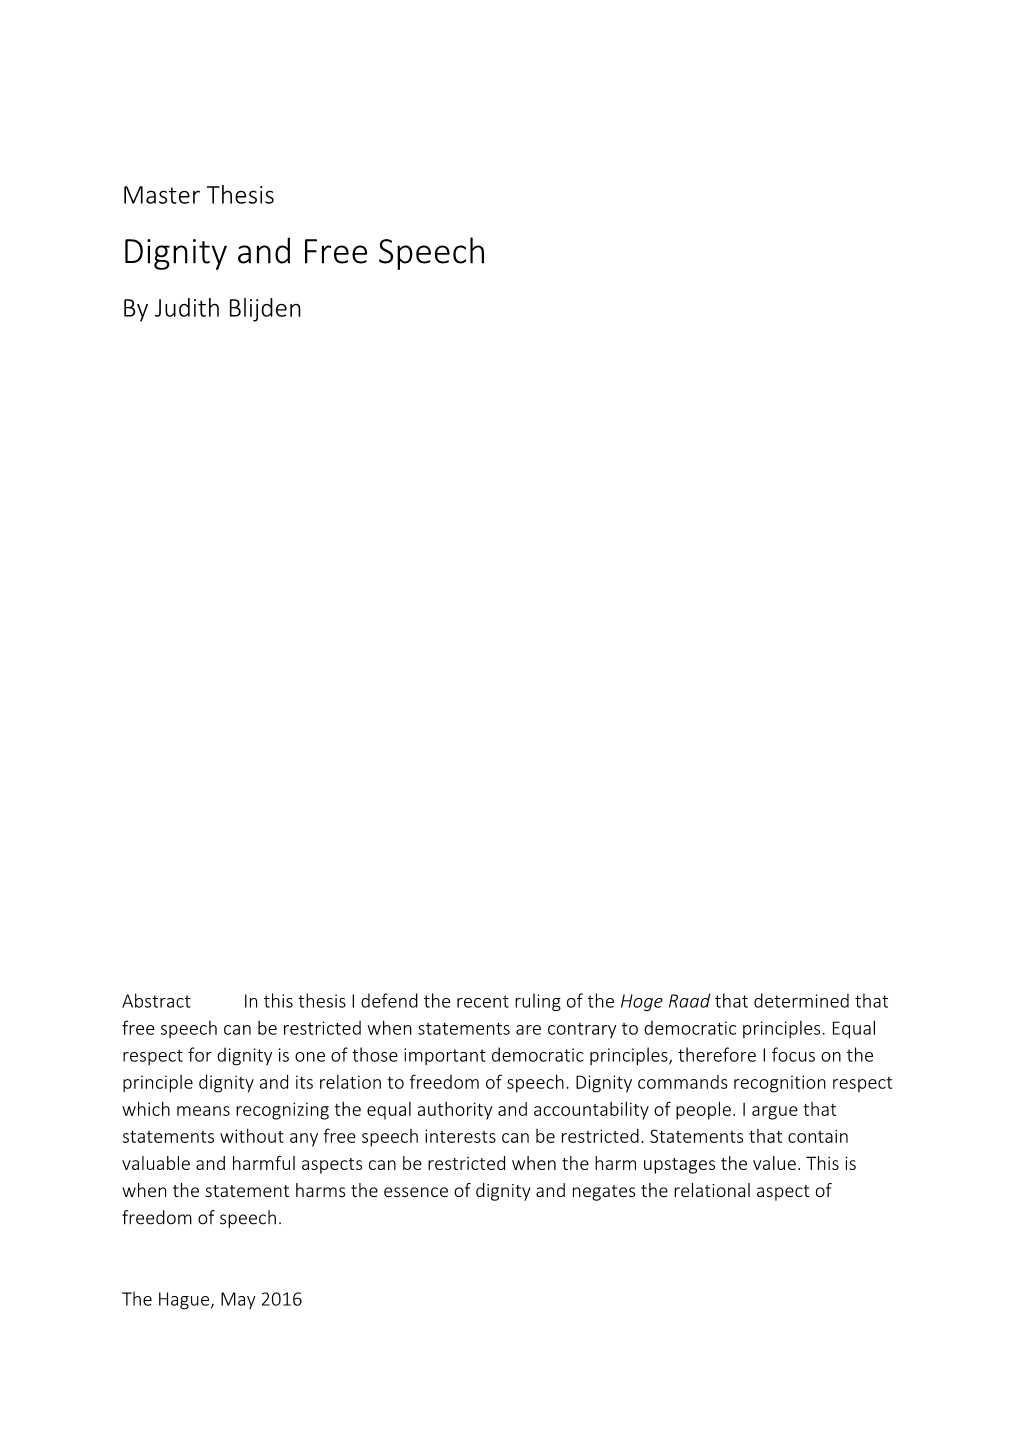 Dignity and Free Speech by Judith Blijden